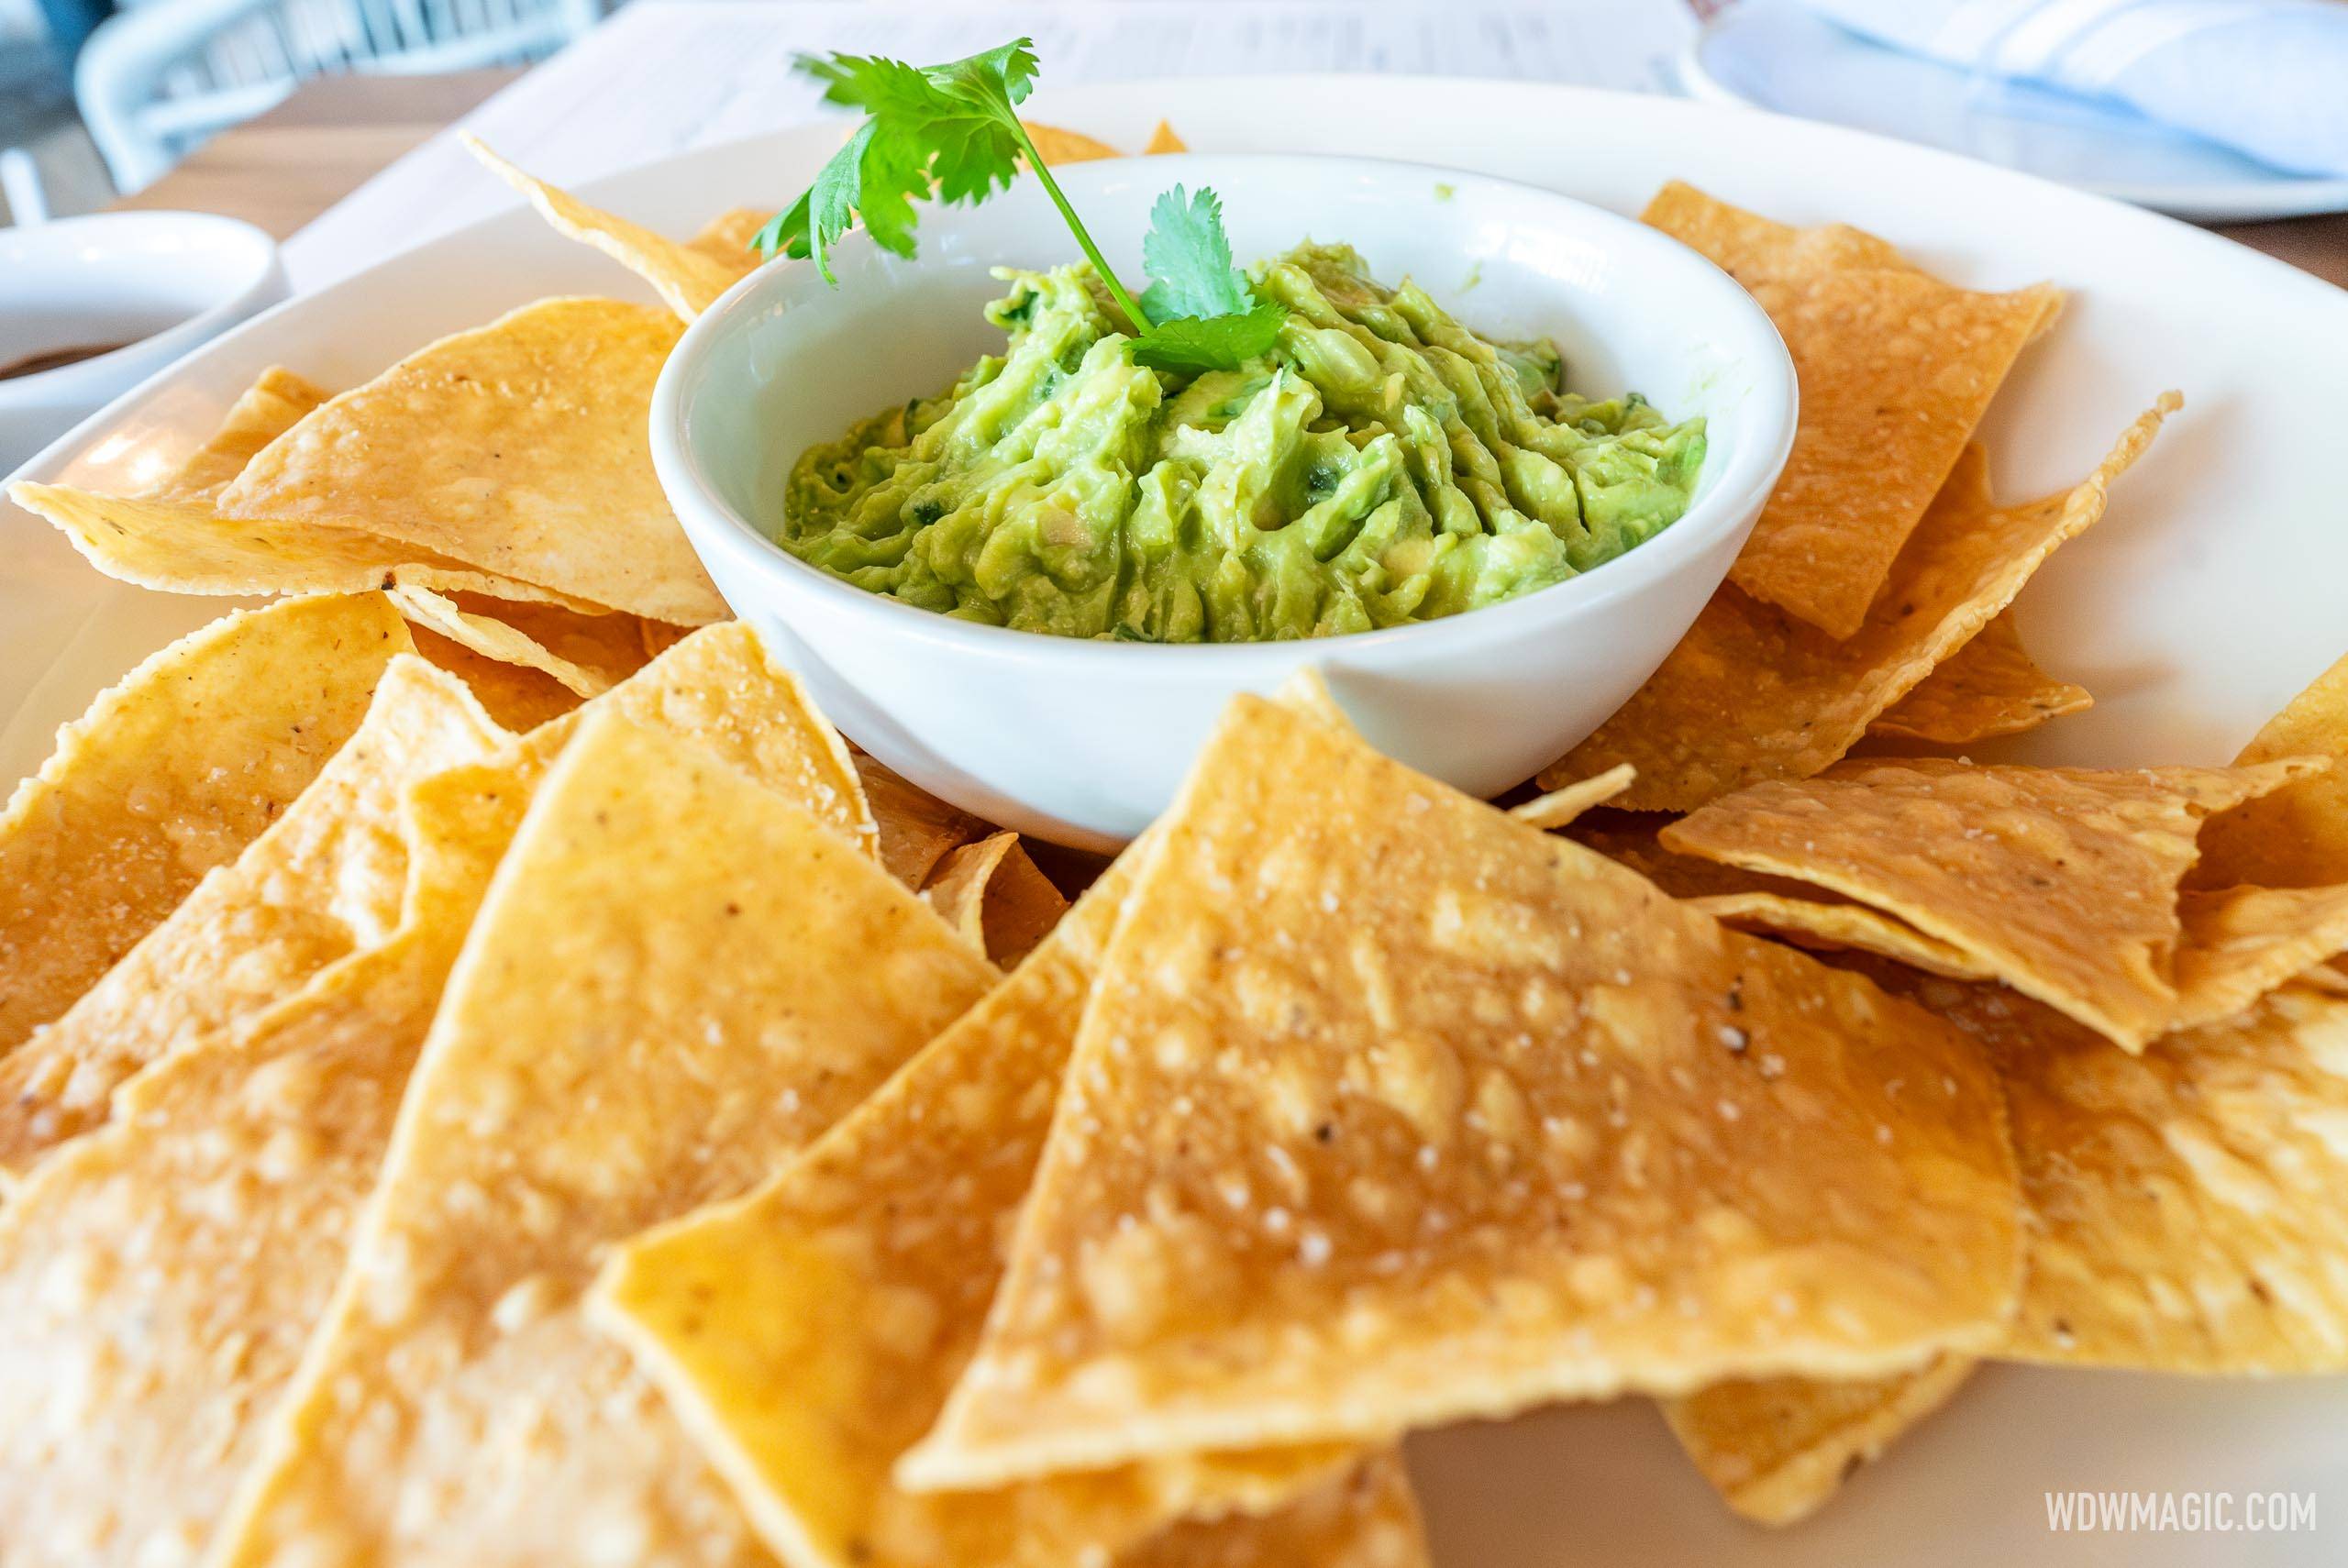 Signature Guacamole and chips